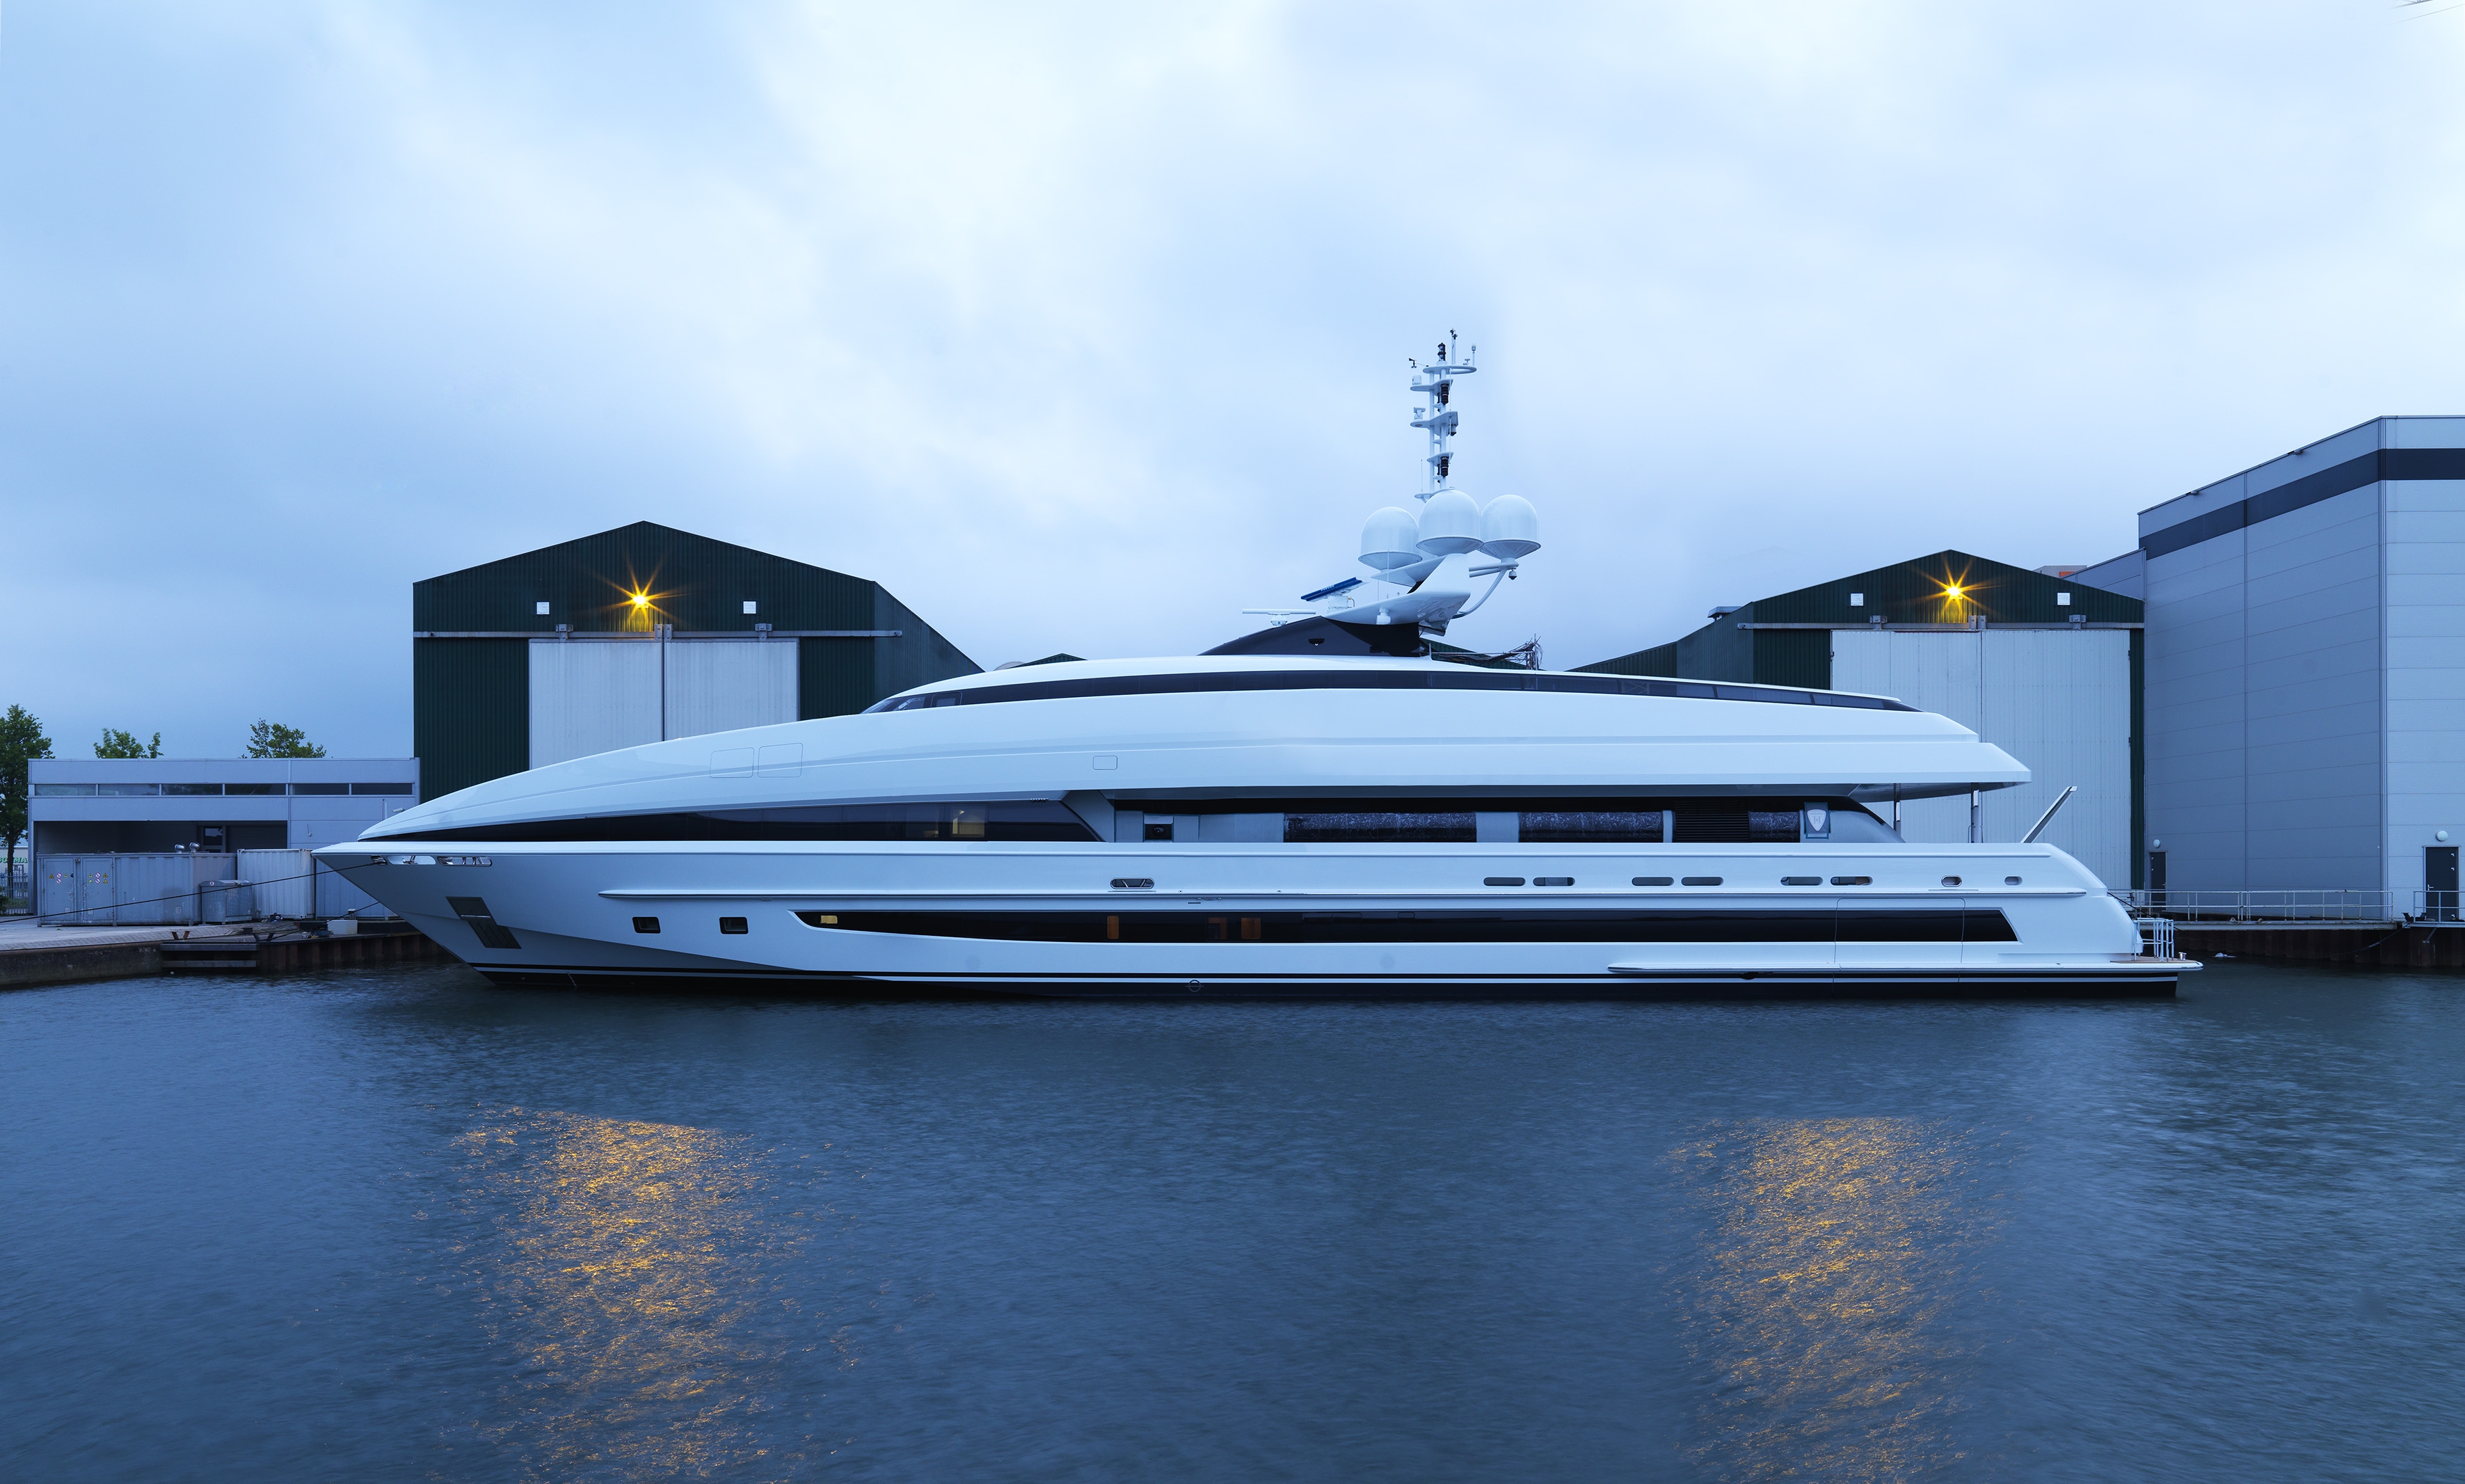 Heesen Yachts proudly announces the launch of 50m Superyacht Crazy Me